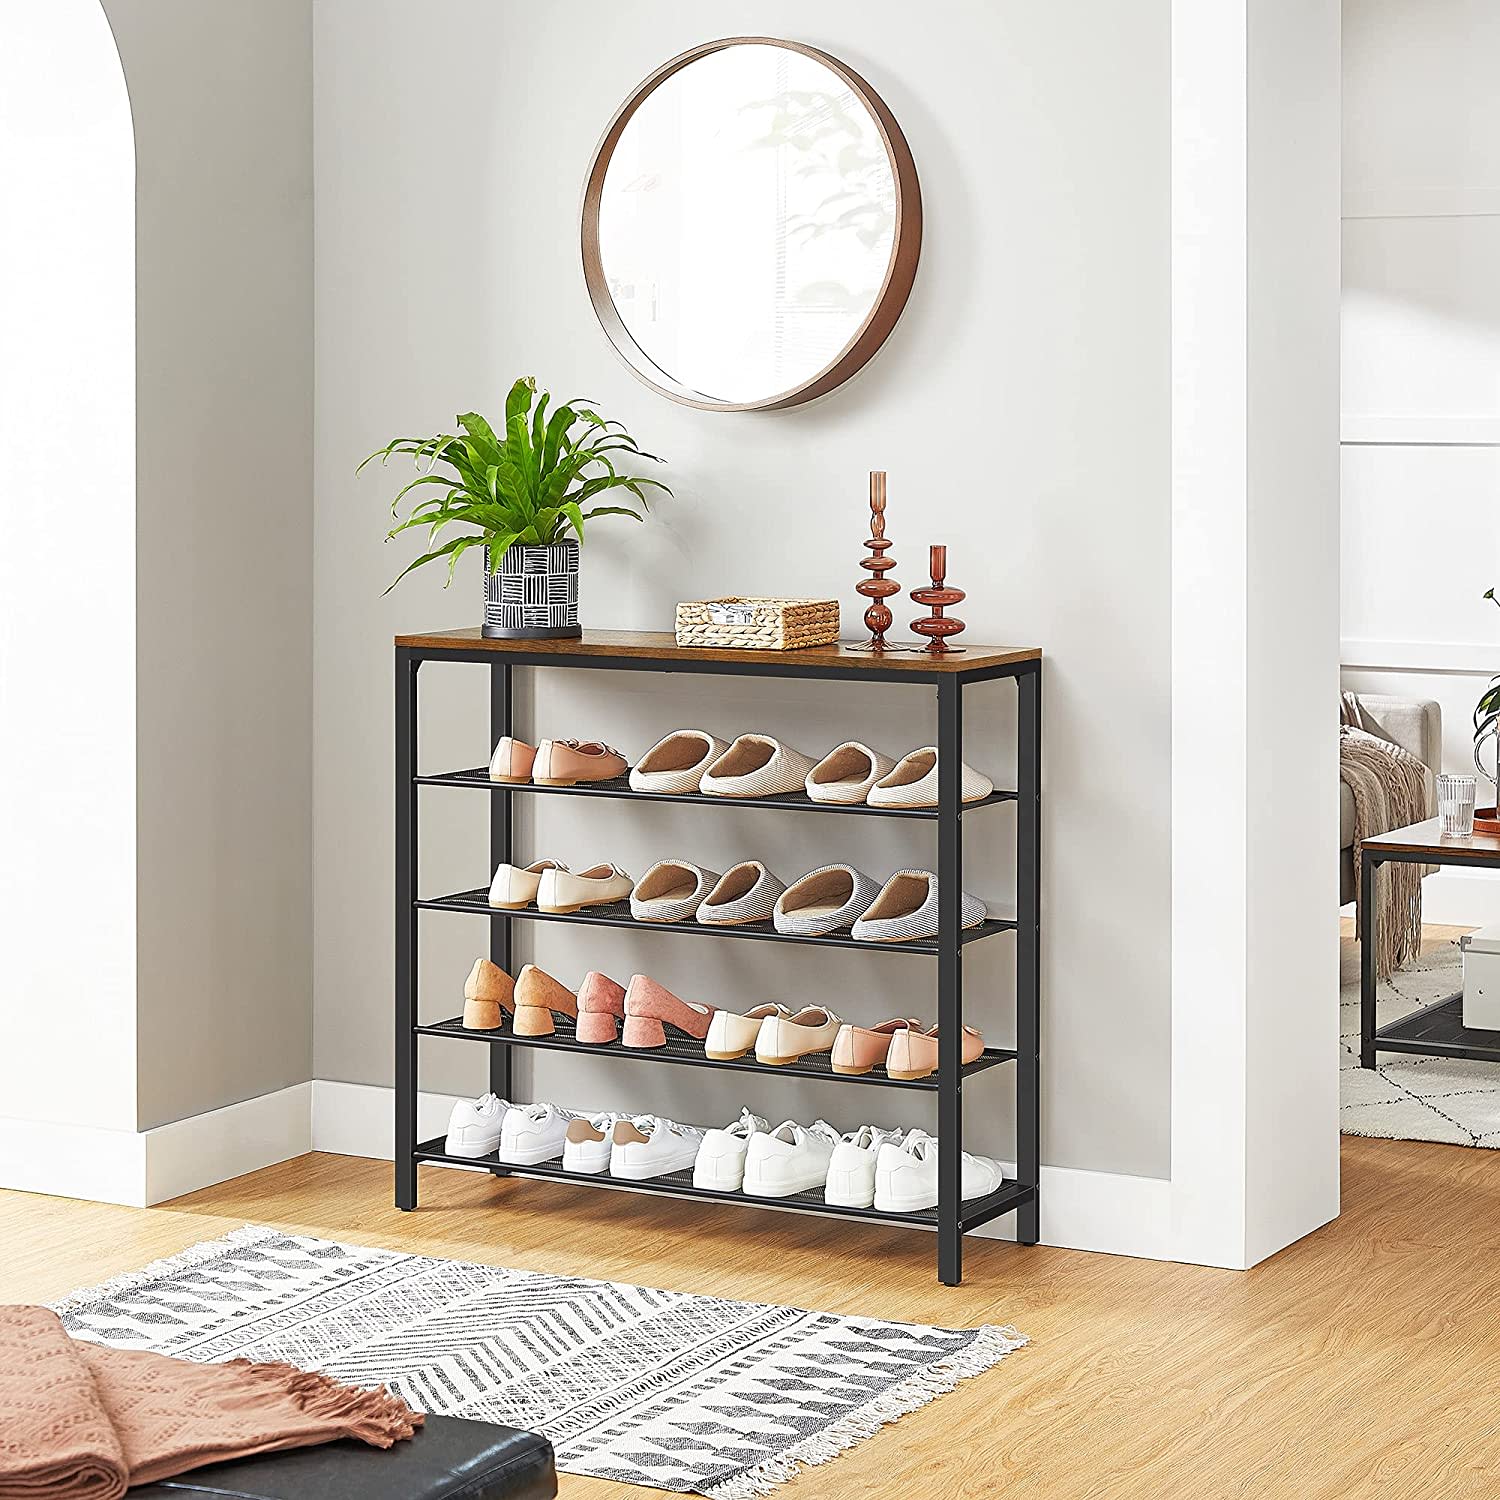 This Shoe Rack is So Stylish, It's Part of My Decor